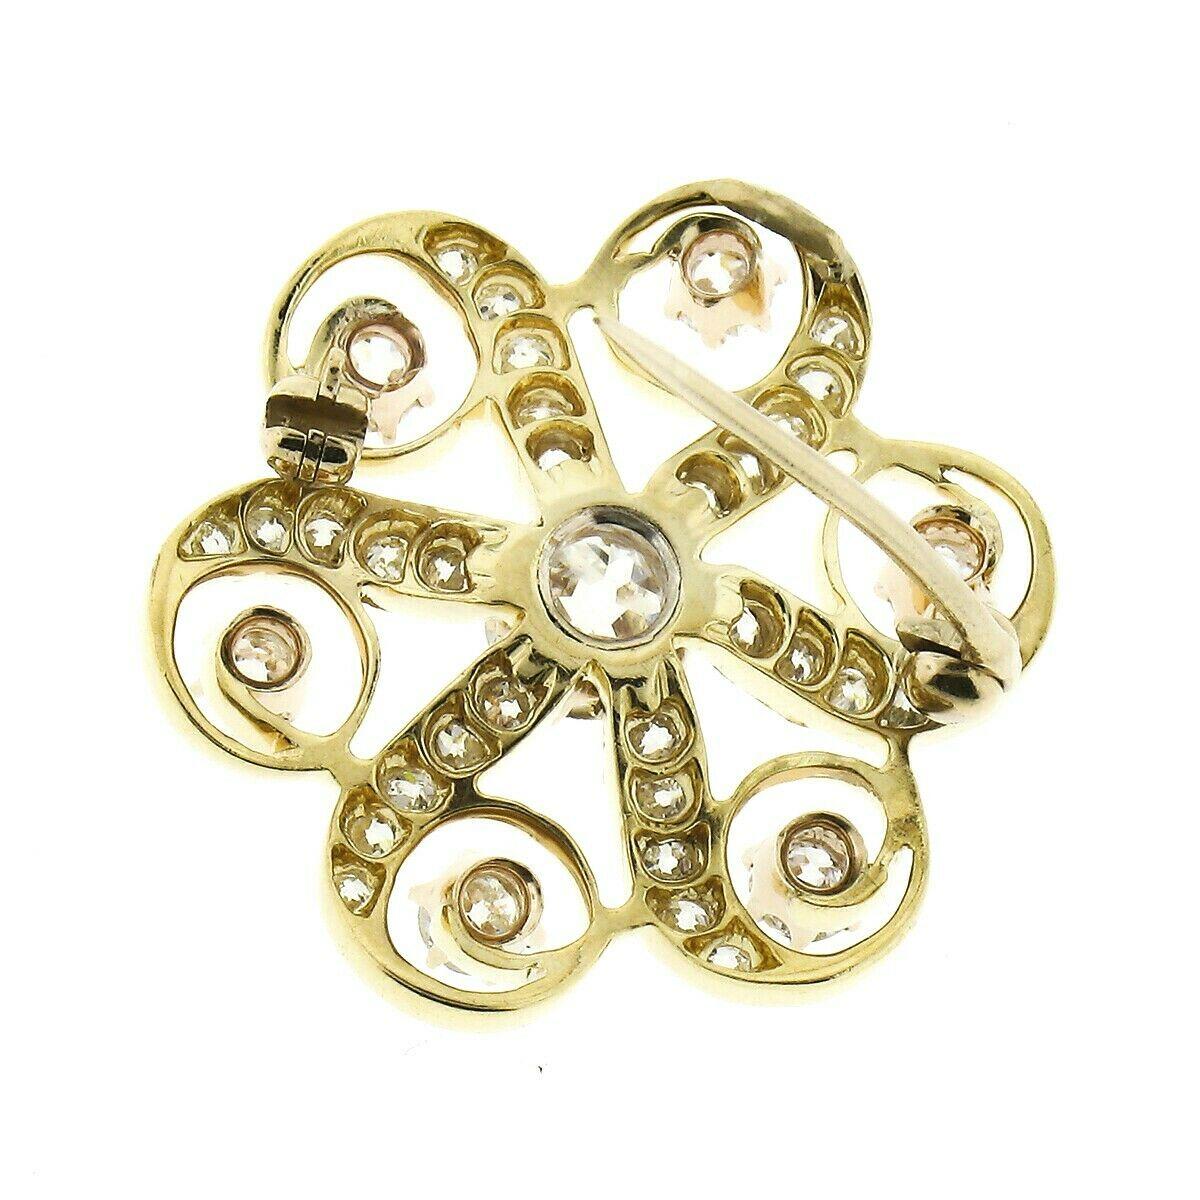 Antique Victorian 18k Gold 1.97ctw Old European Diamond Swirl Flower Pin Brooch In Good Condition For Sale In Montclair, NJ